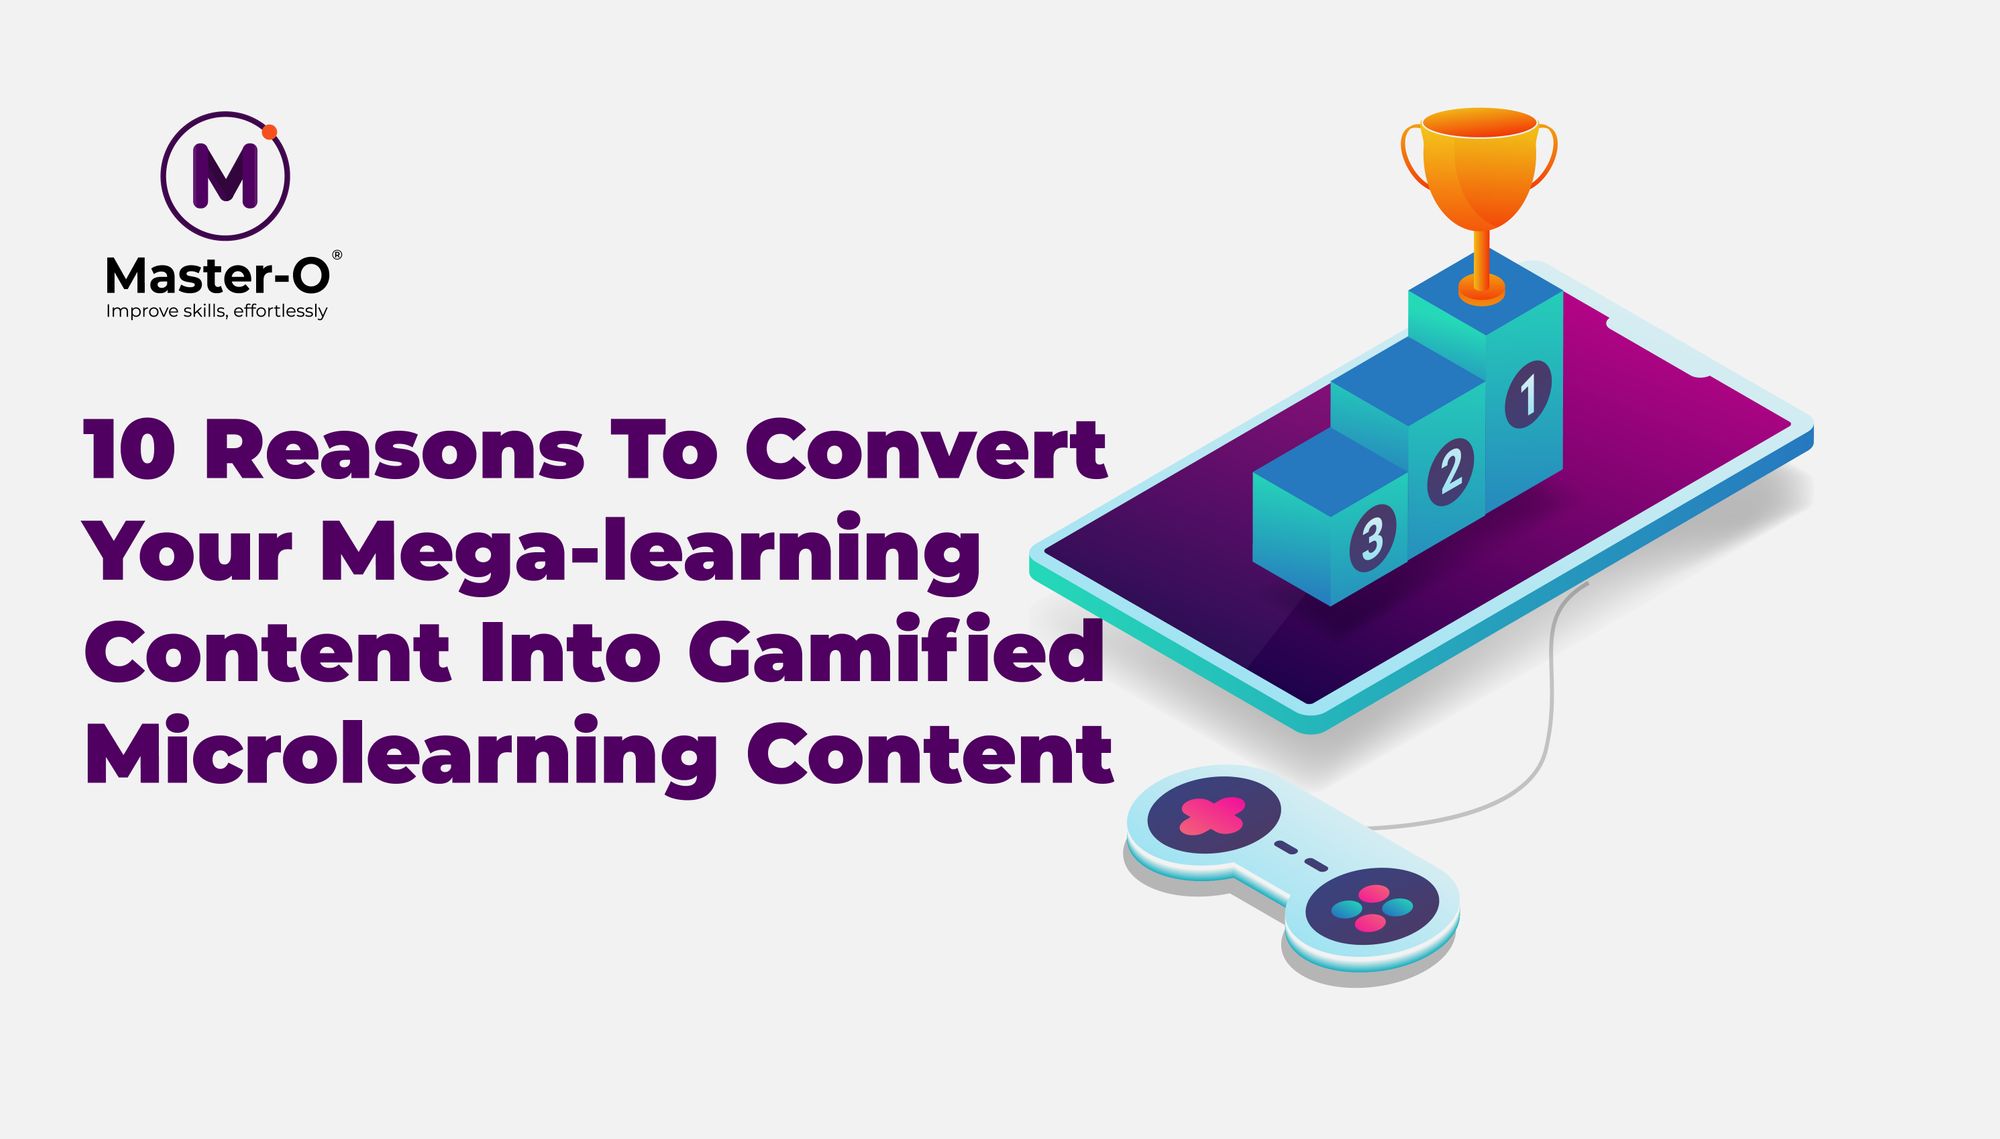 Infographic - 10 Reasons for Gamifying Learning Content